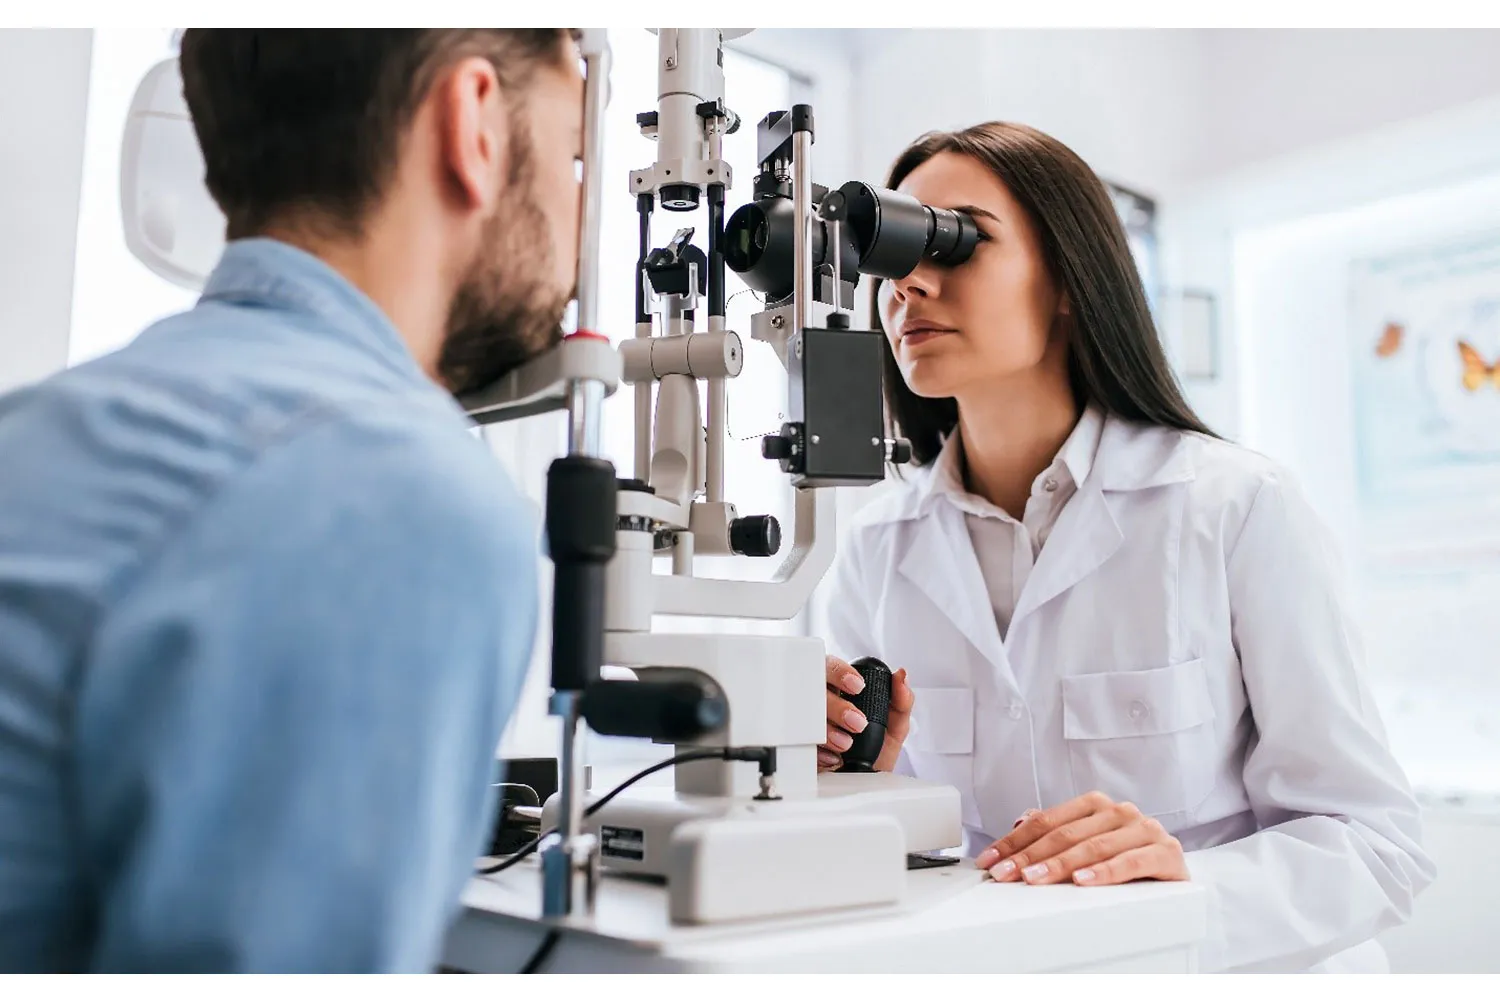 How to find a job as an Ophthalmologist?